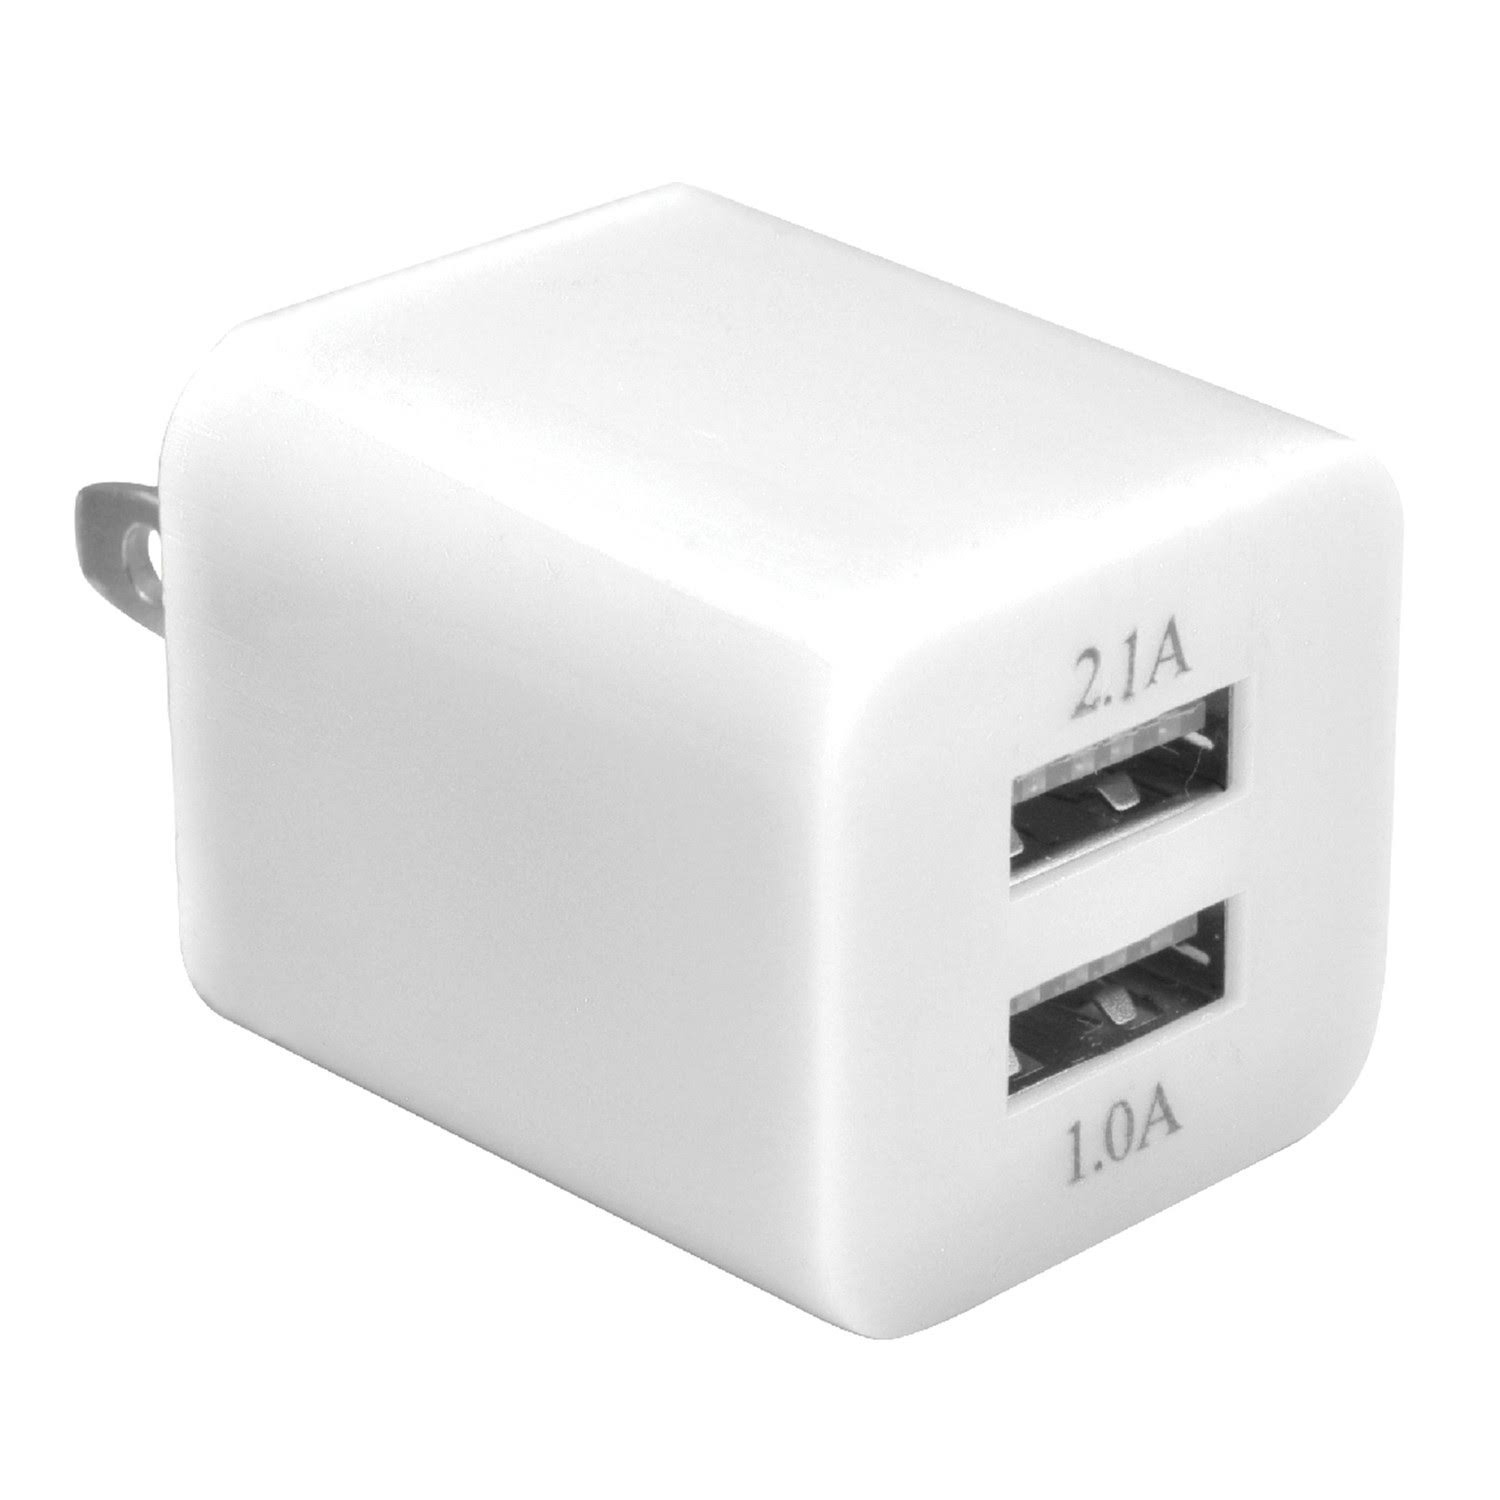 Ematic 2-PORT WALL CHARGER White